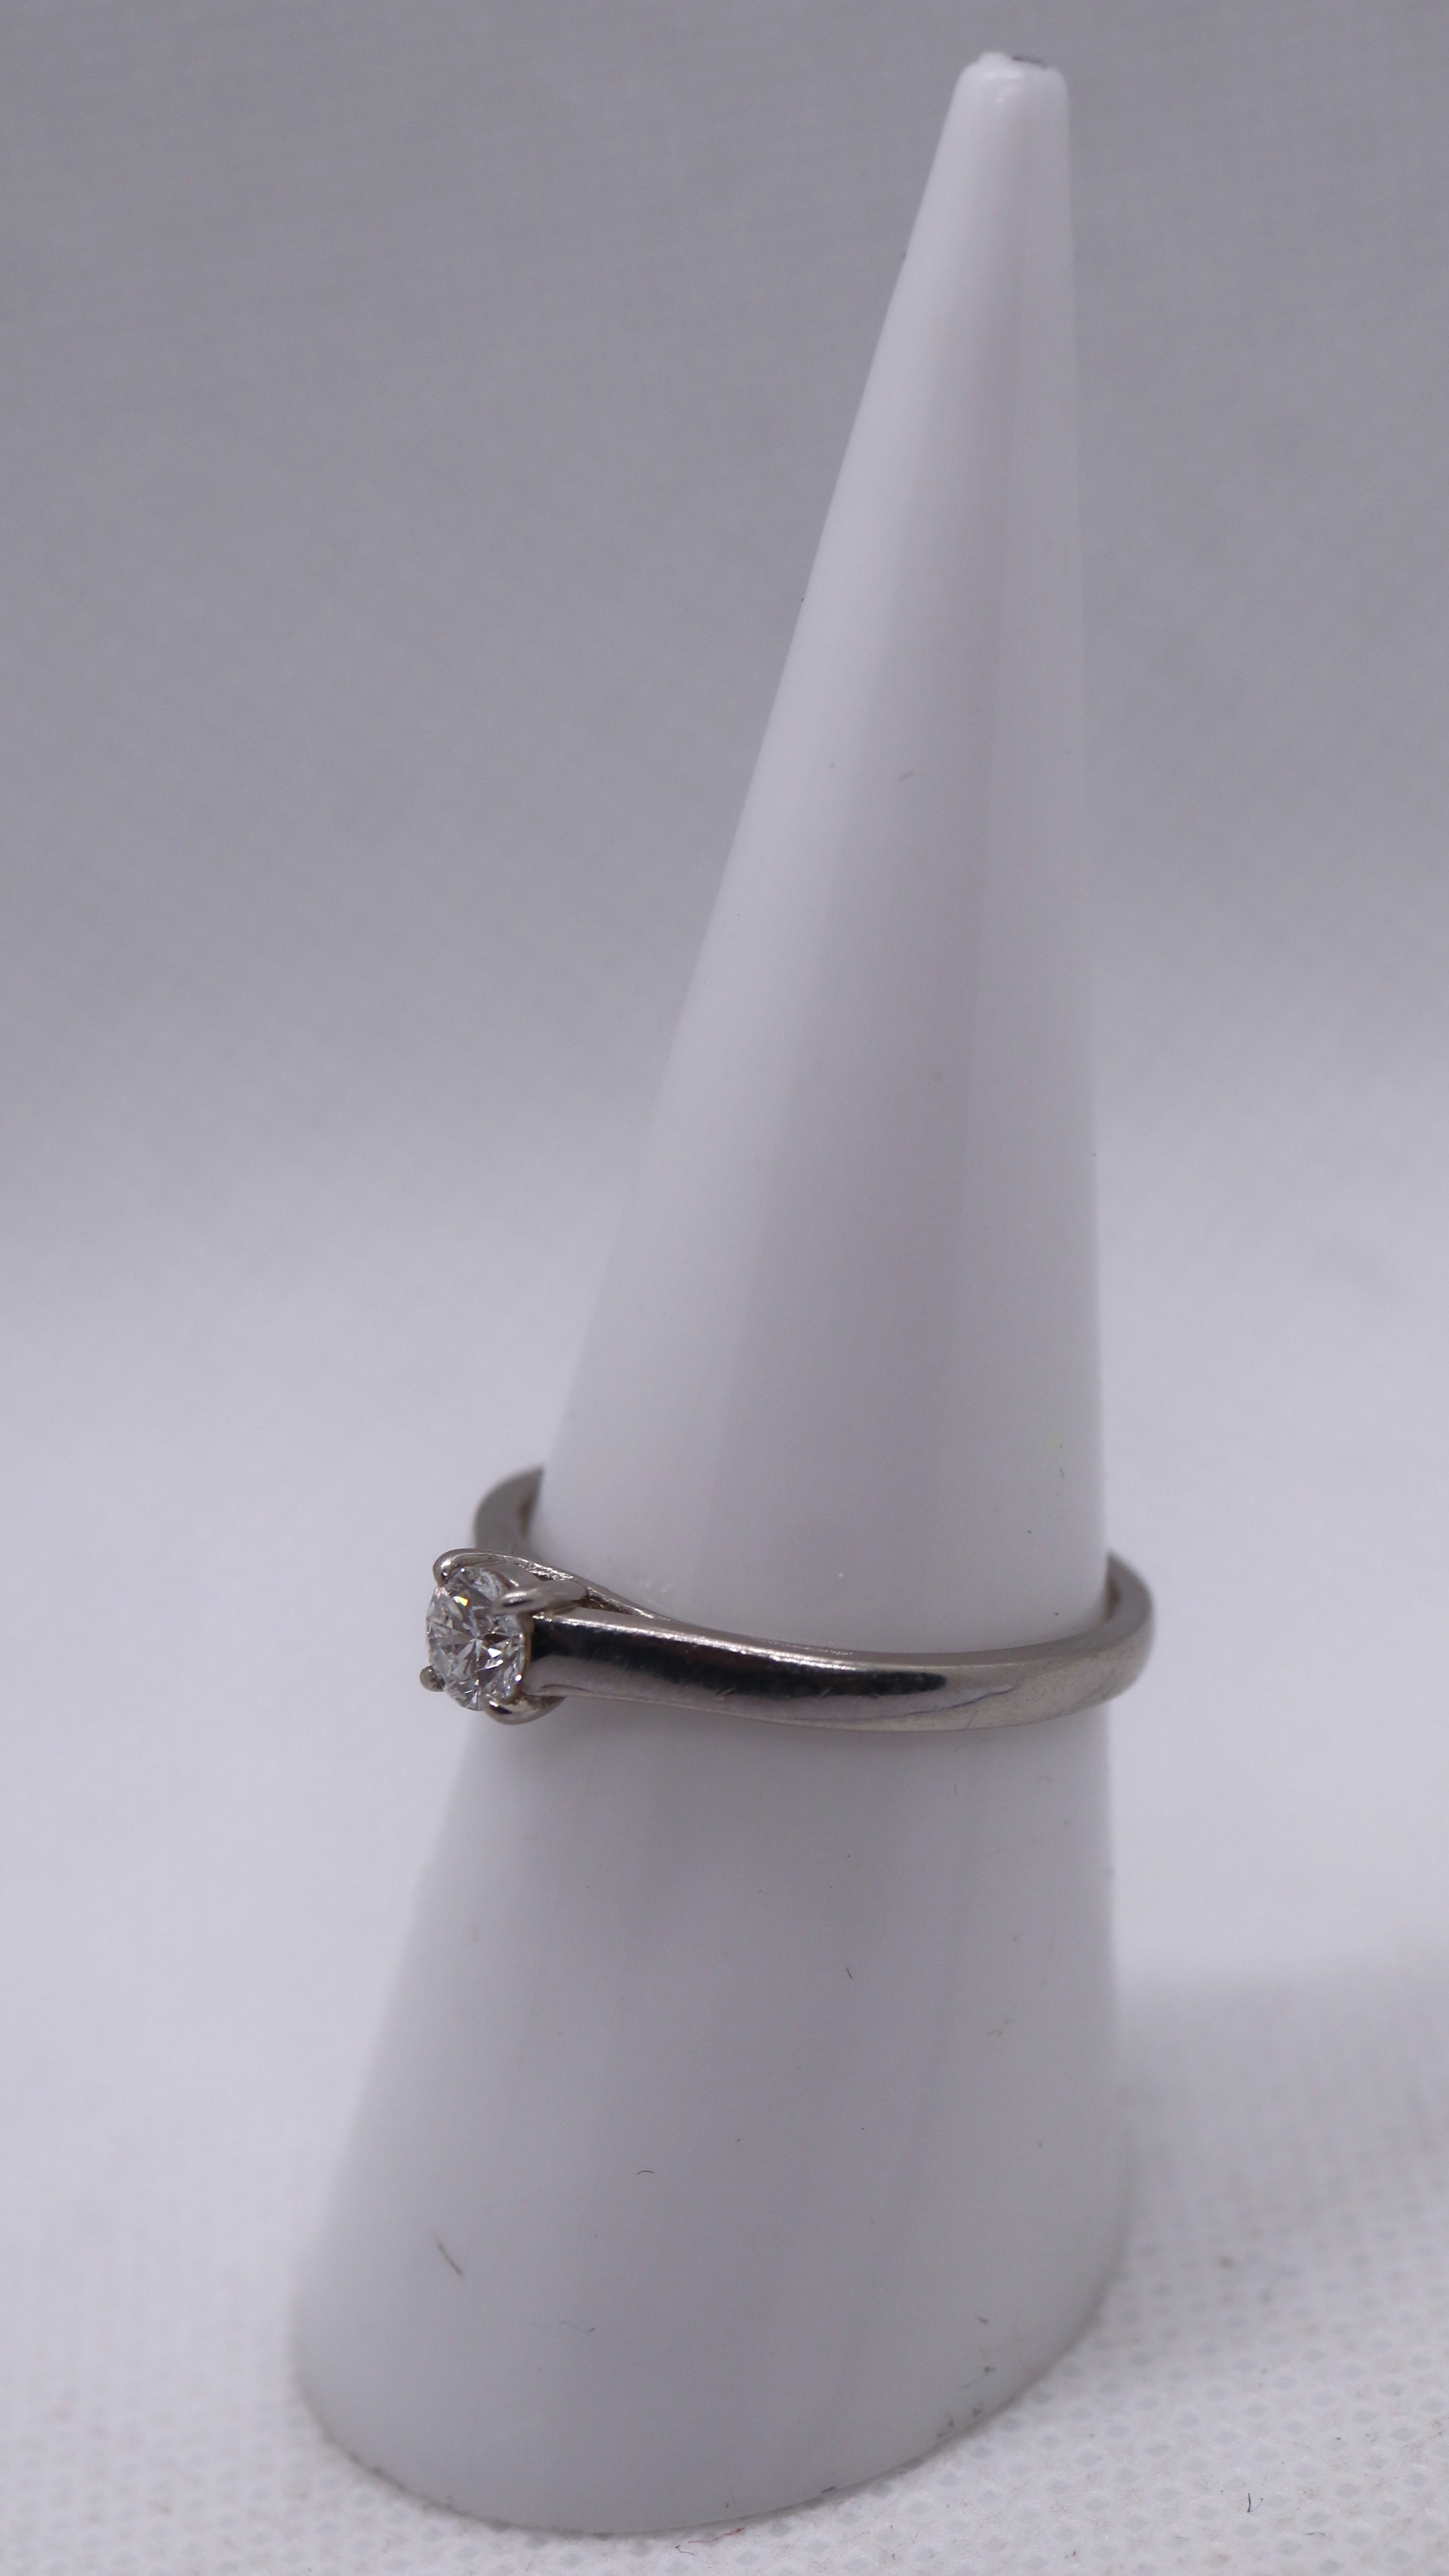 Platinum and diamond solitaire ring - Size N - Image 2 of 3